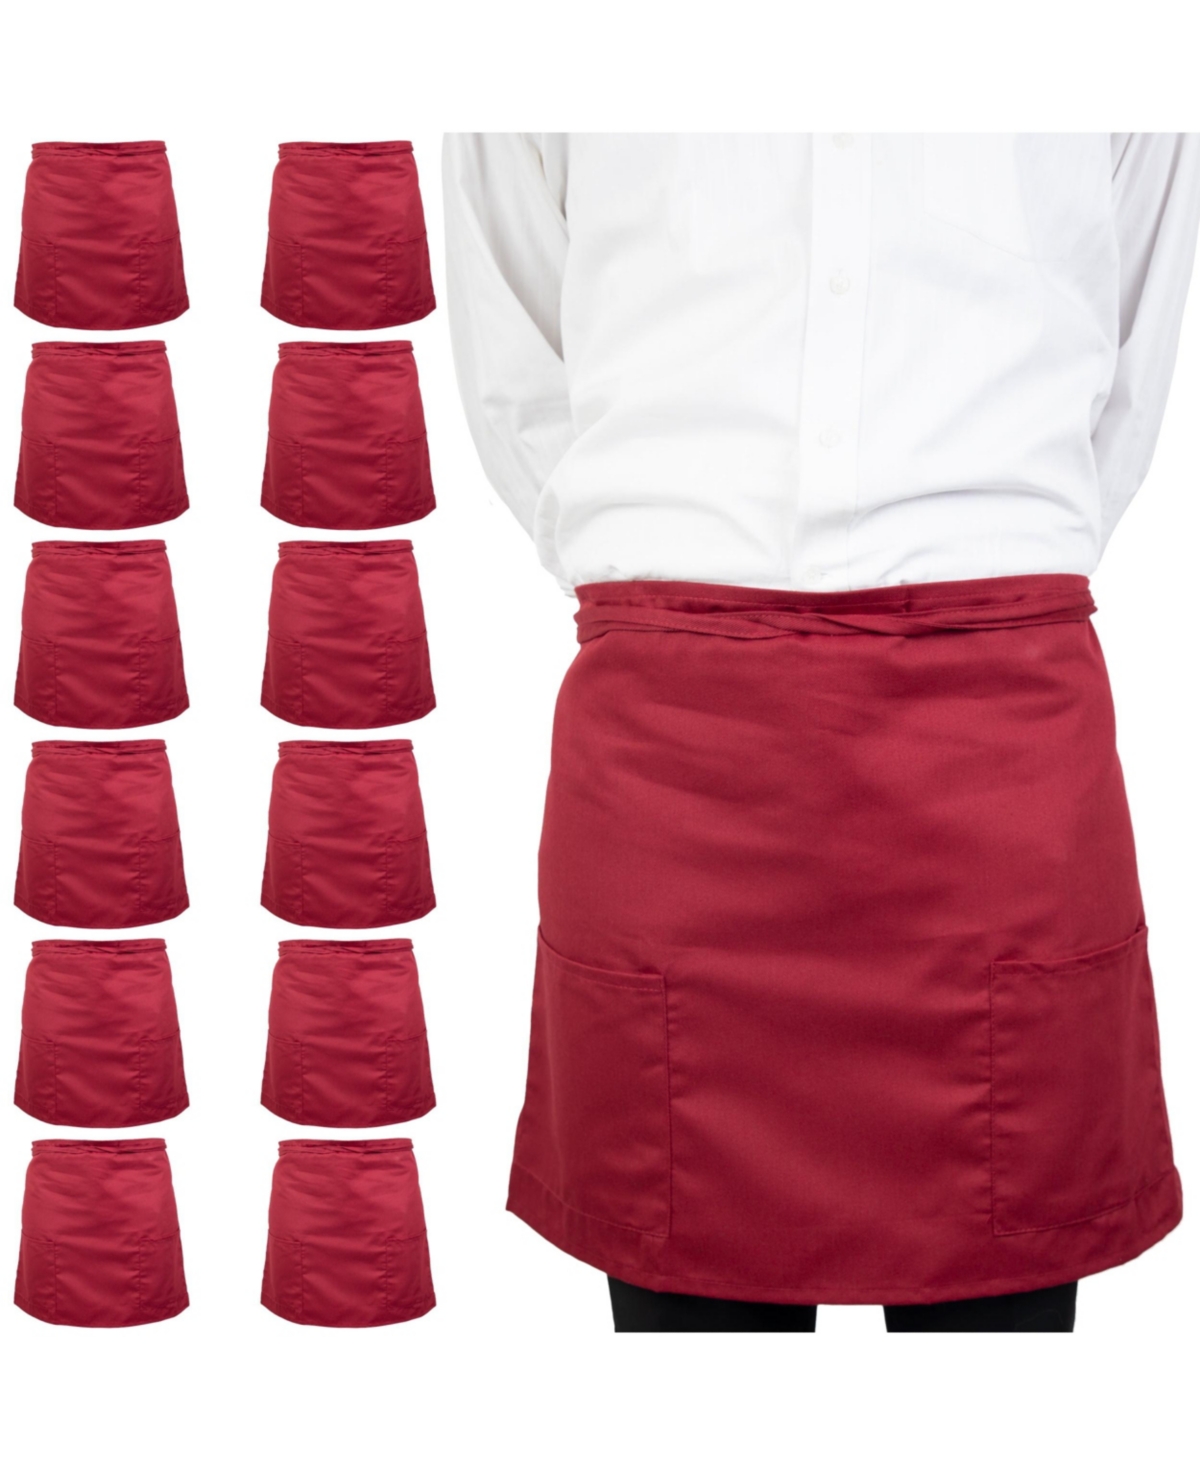 Arkwright Mariposa Half-Bistro Aprons (12 Pack), 18x30 in., Soft Polyester Blend, Color Options - White